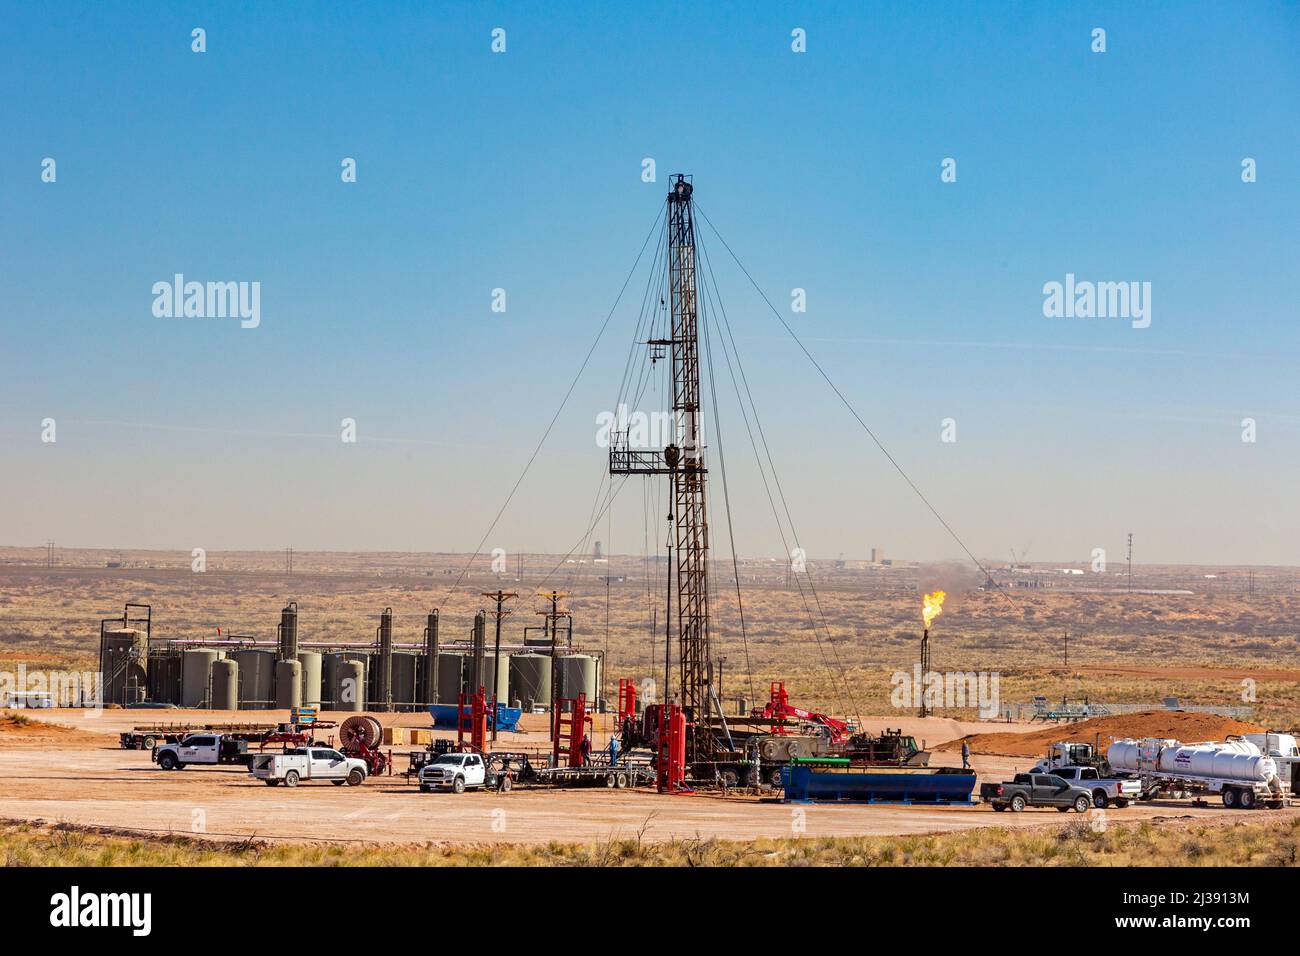 Loving, New Mexico - An oil drilling rig and oil storage tanks in the Permian Basin. The Permian Basin is a major oil and gas producing area in west T Stock Photo